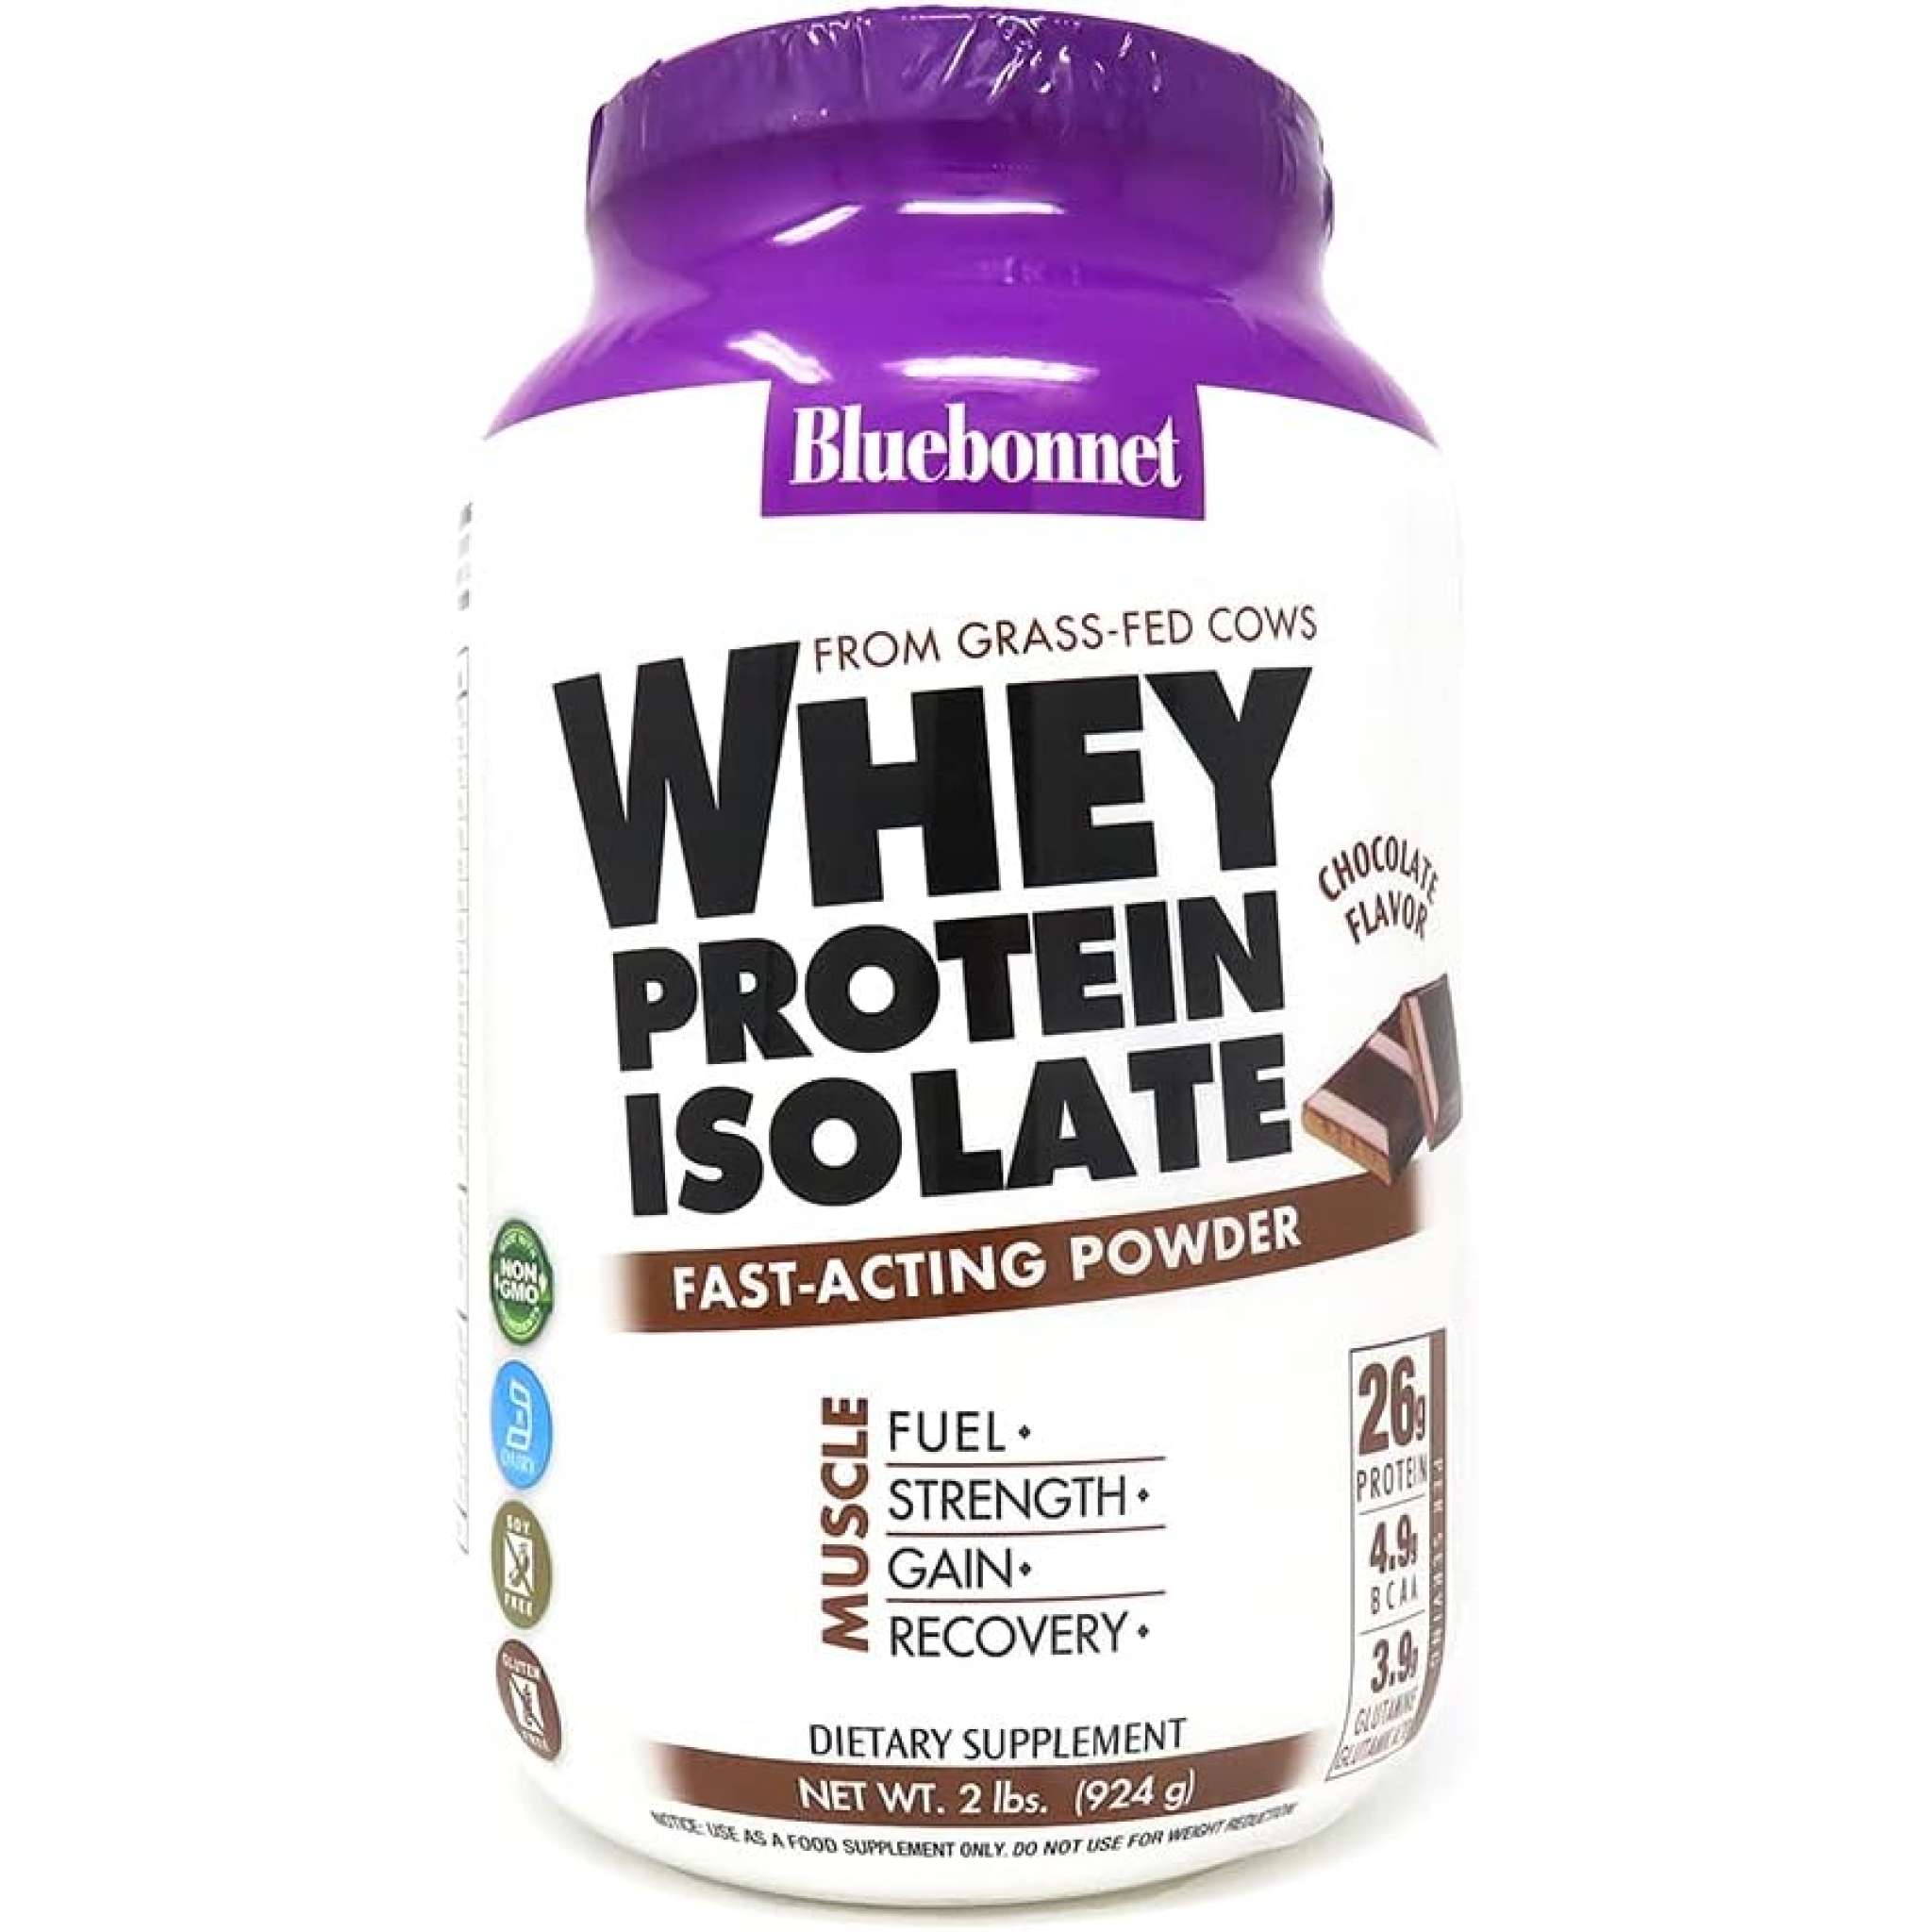 Bluebonnet - Whey Protein Isolate Choc